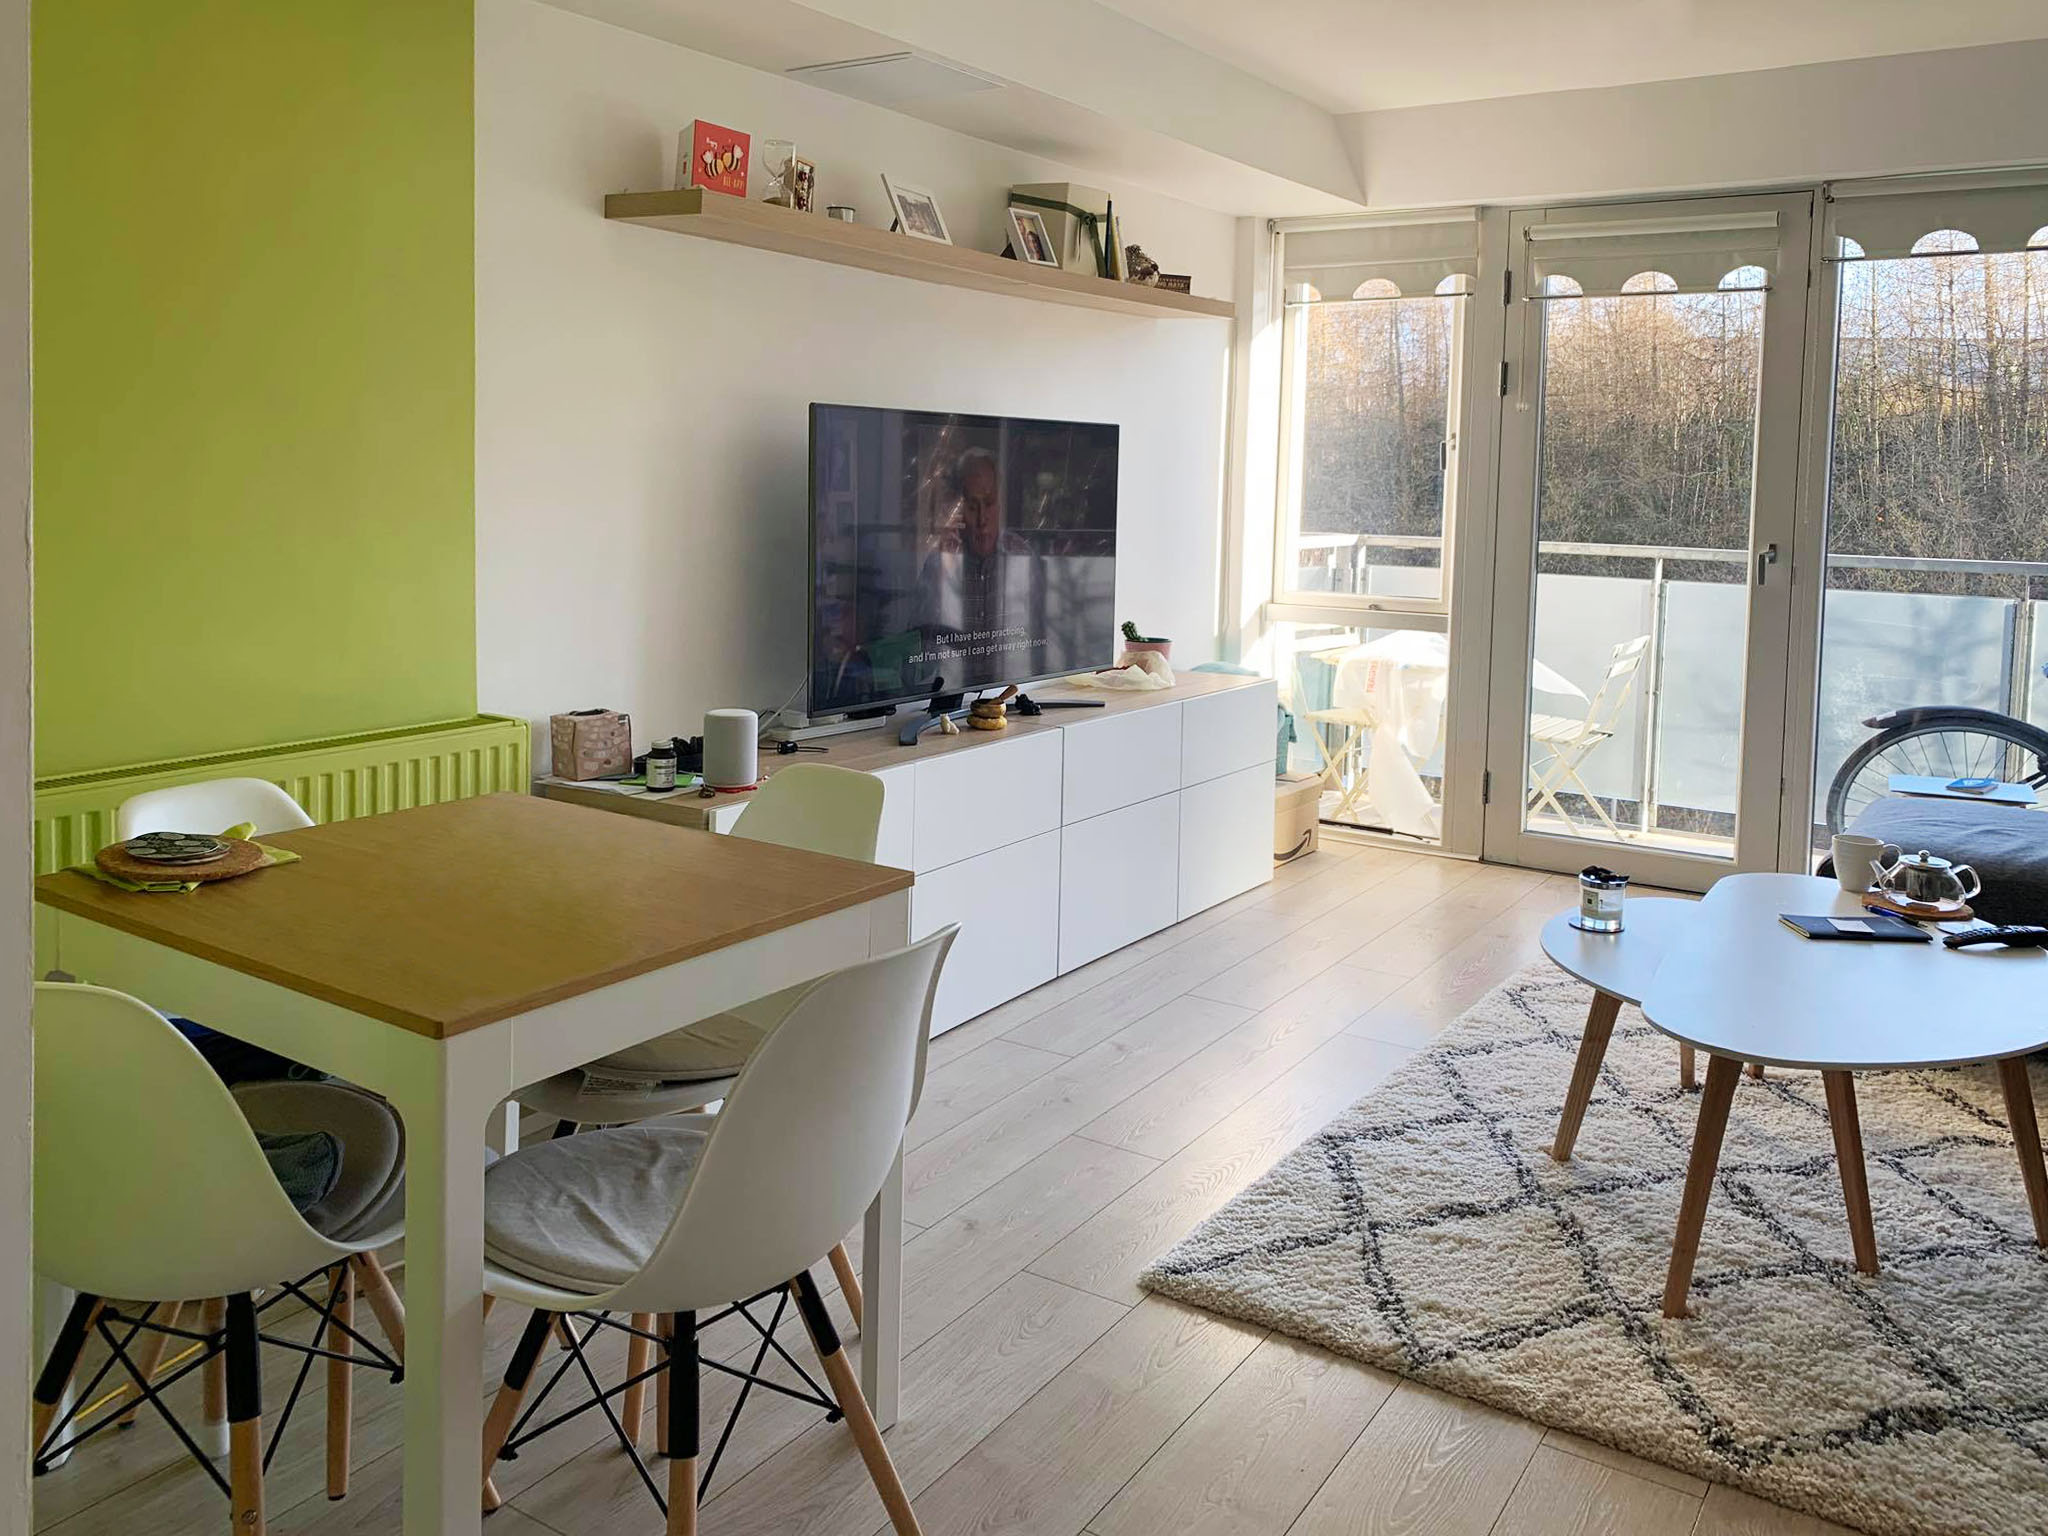 Tiny living room with small dining table in bright green